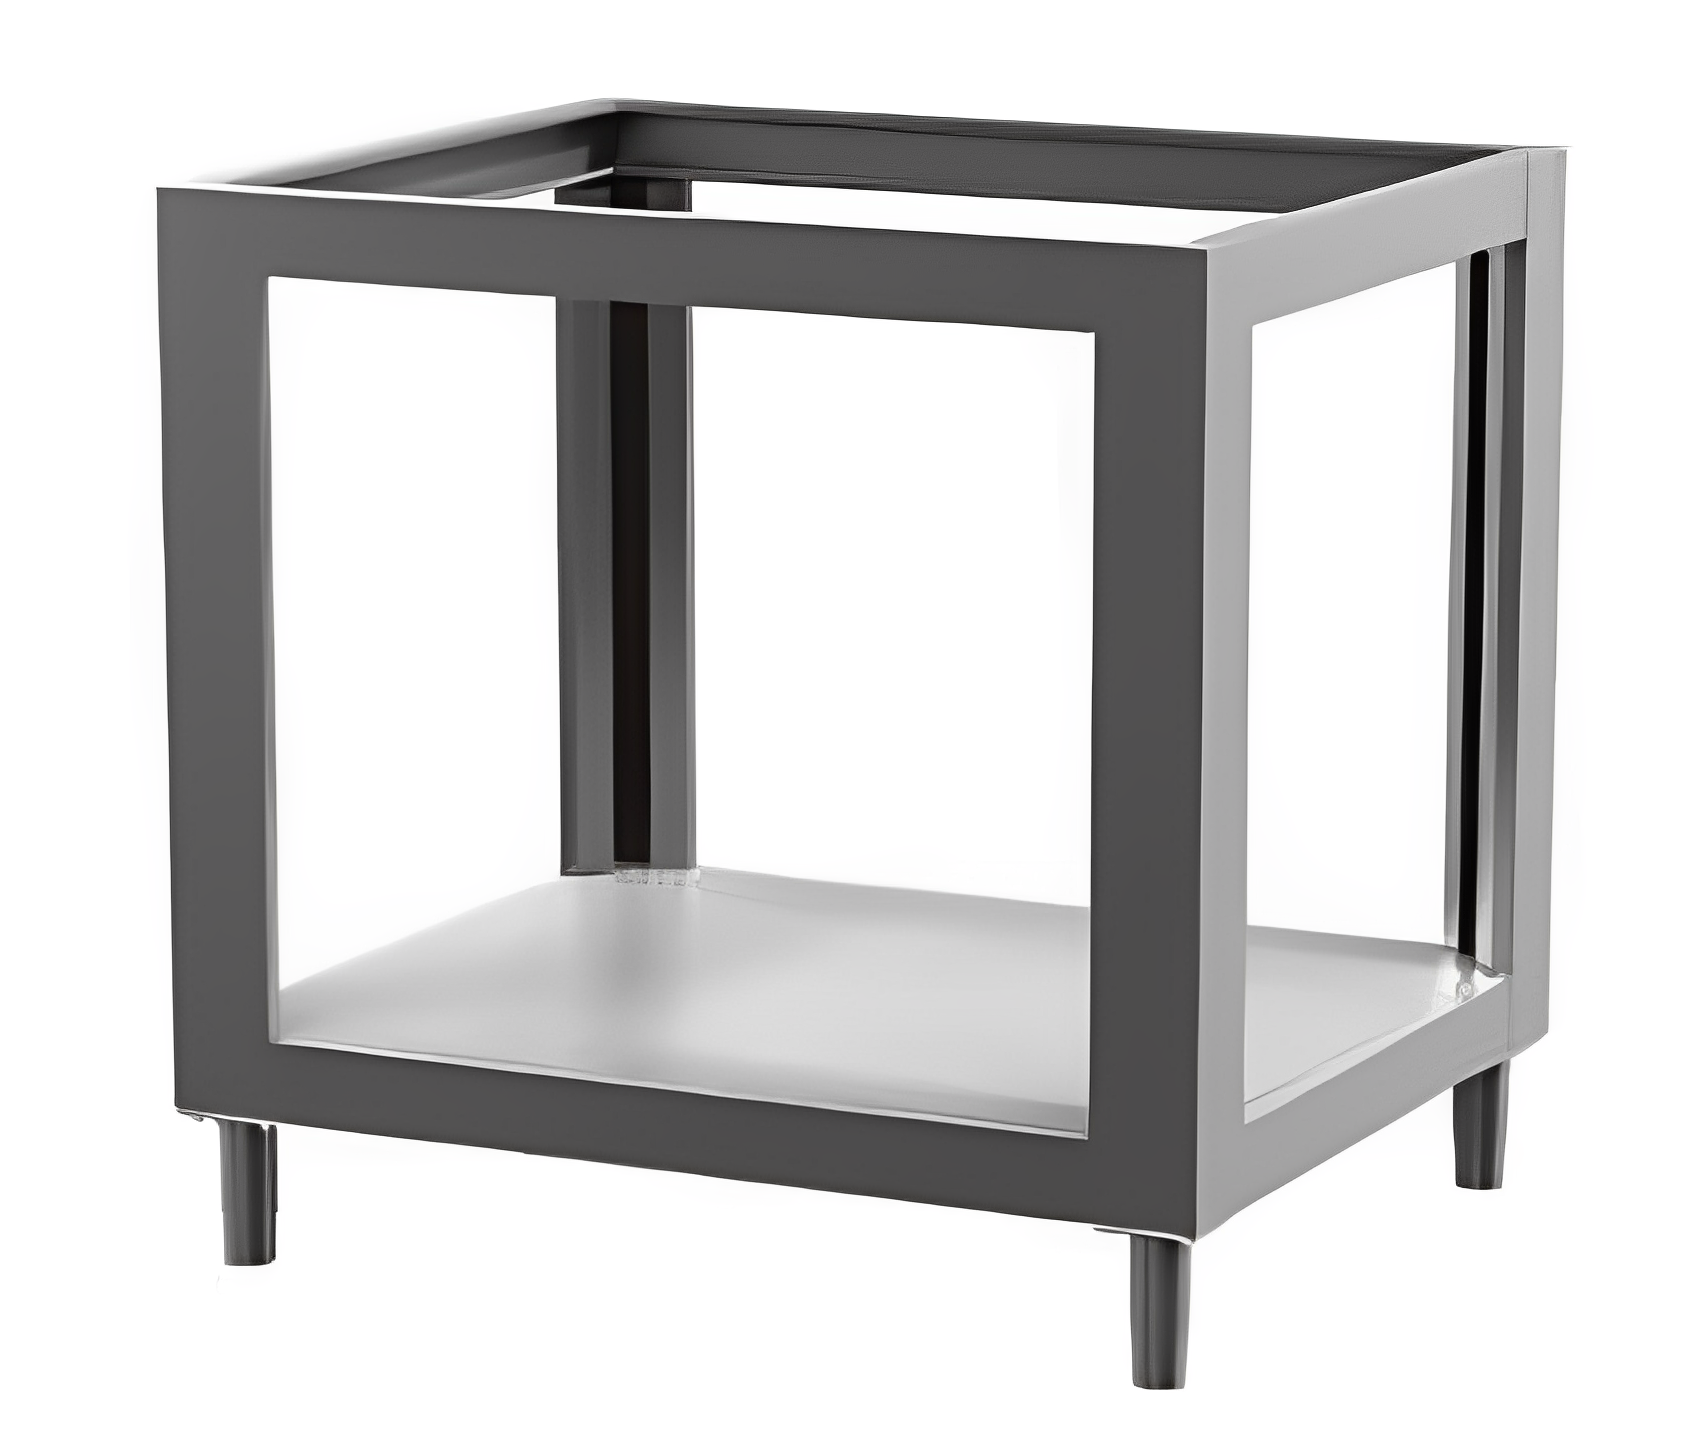 PIZZAGROUP S6L Stands in stainless steel, with service shelf.